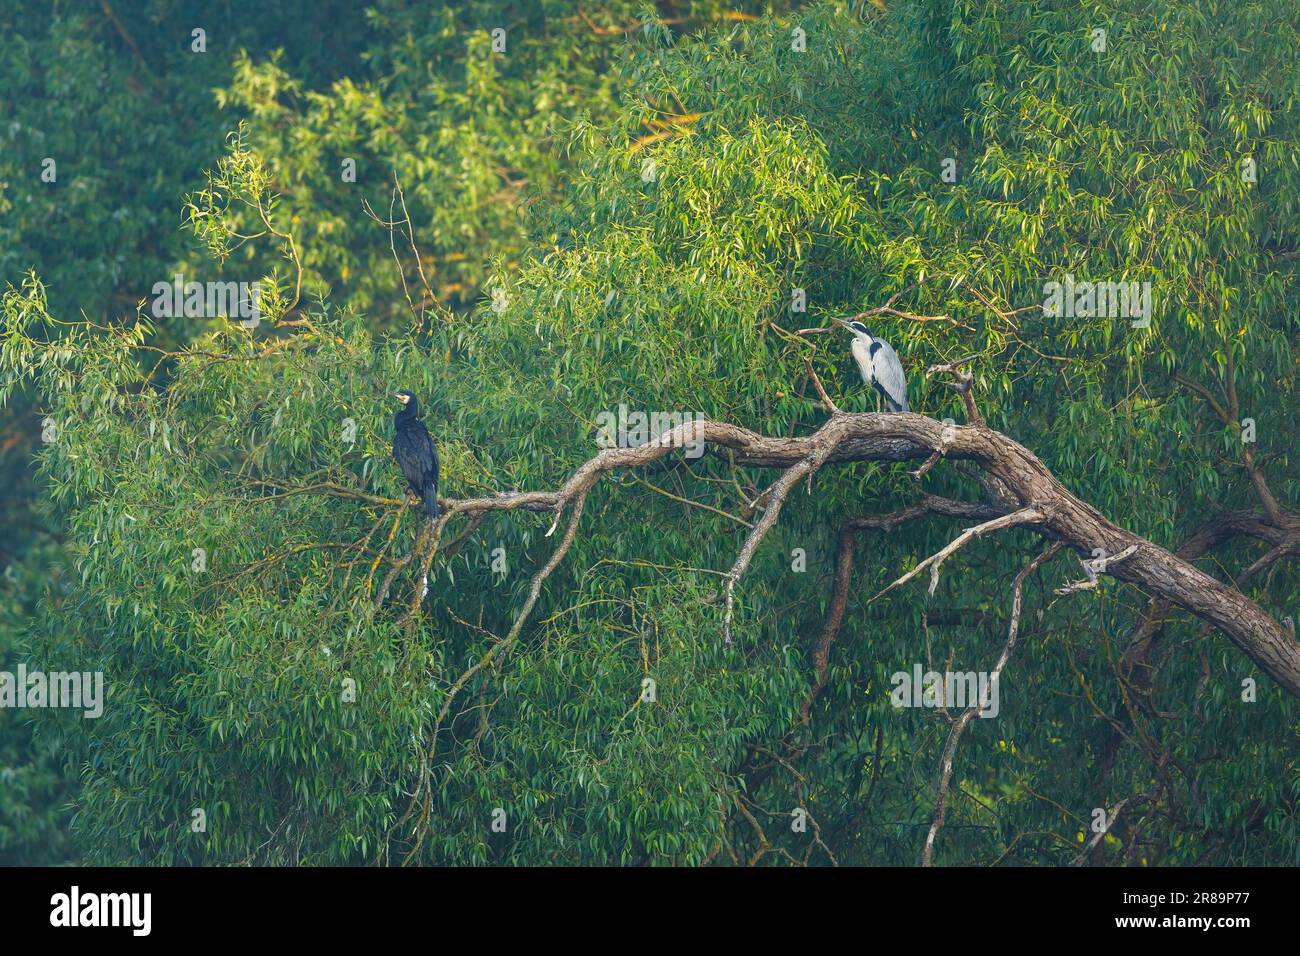 A heron and a cormorant in the trees of the wetlands Stock Photo